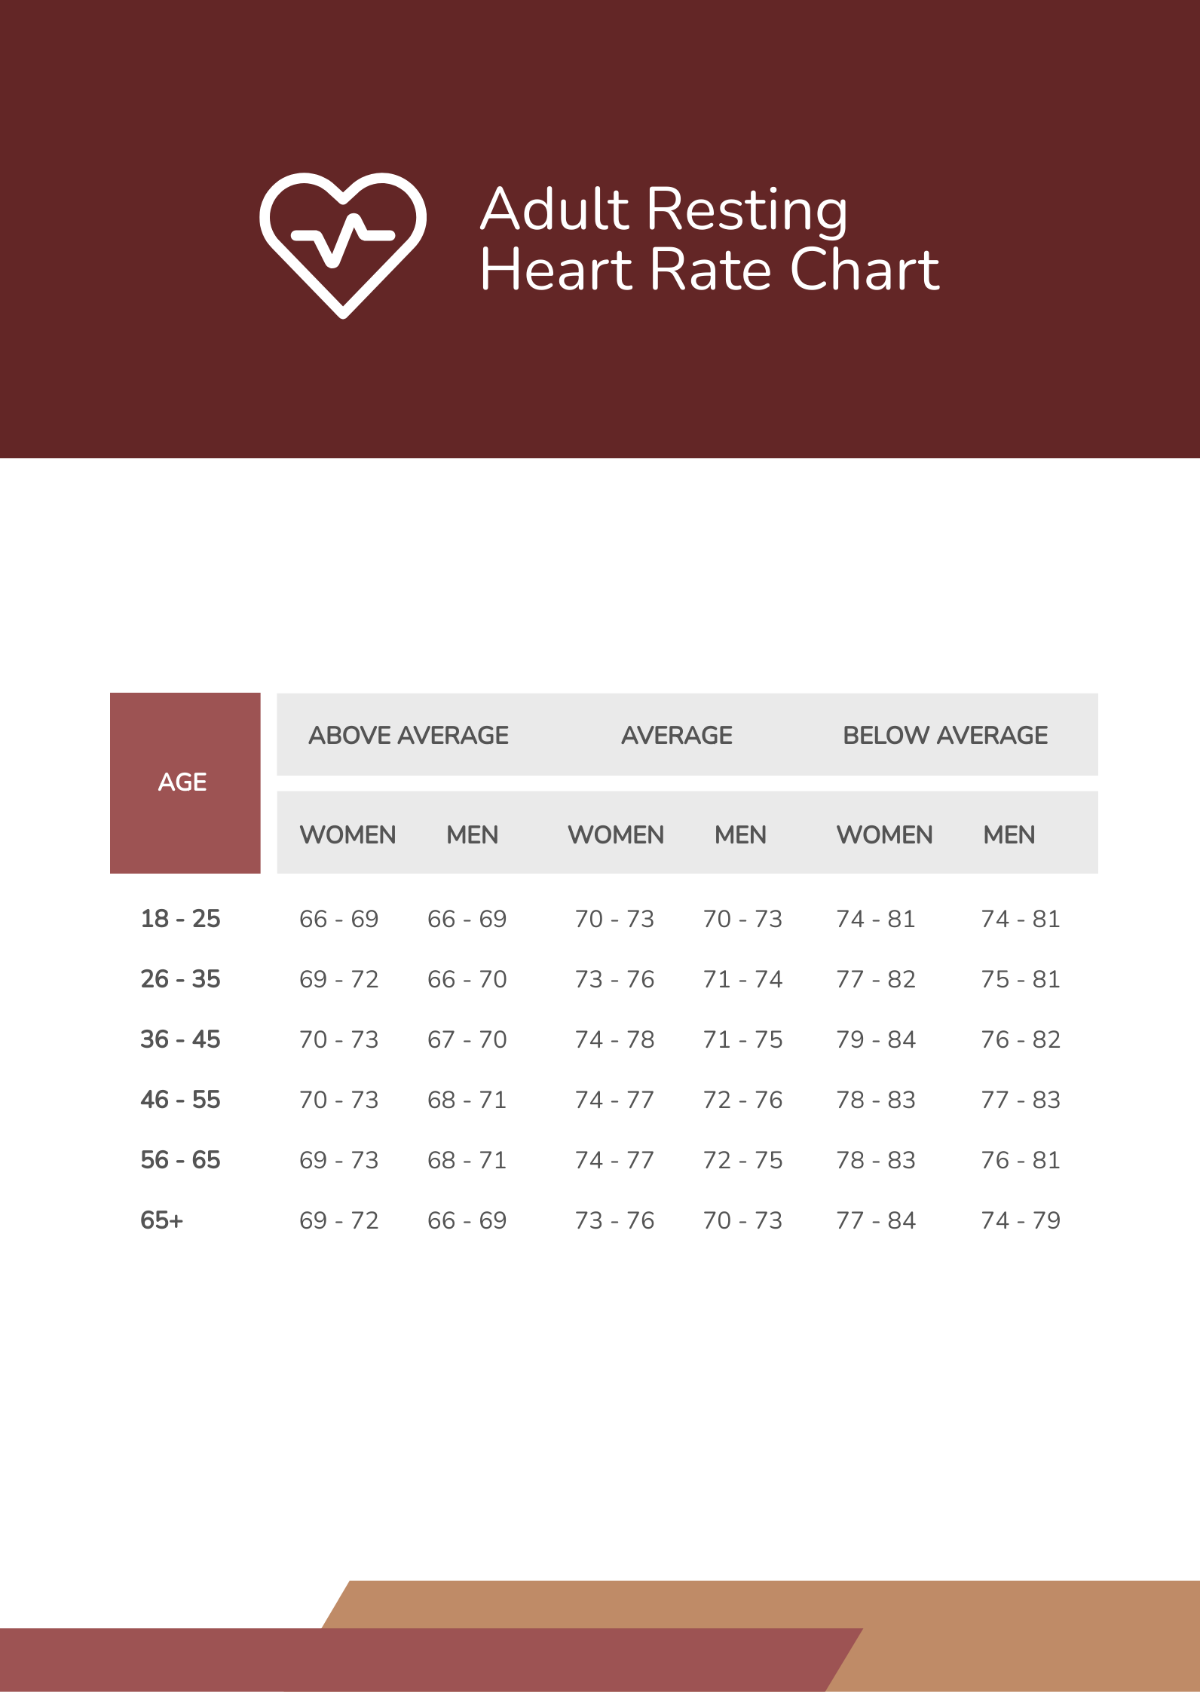 Adult Resting Heart Rate Chart